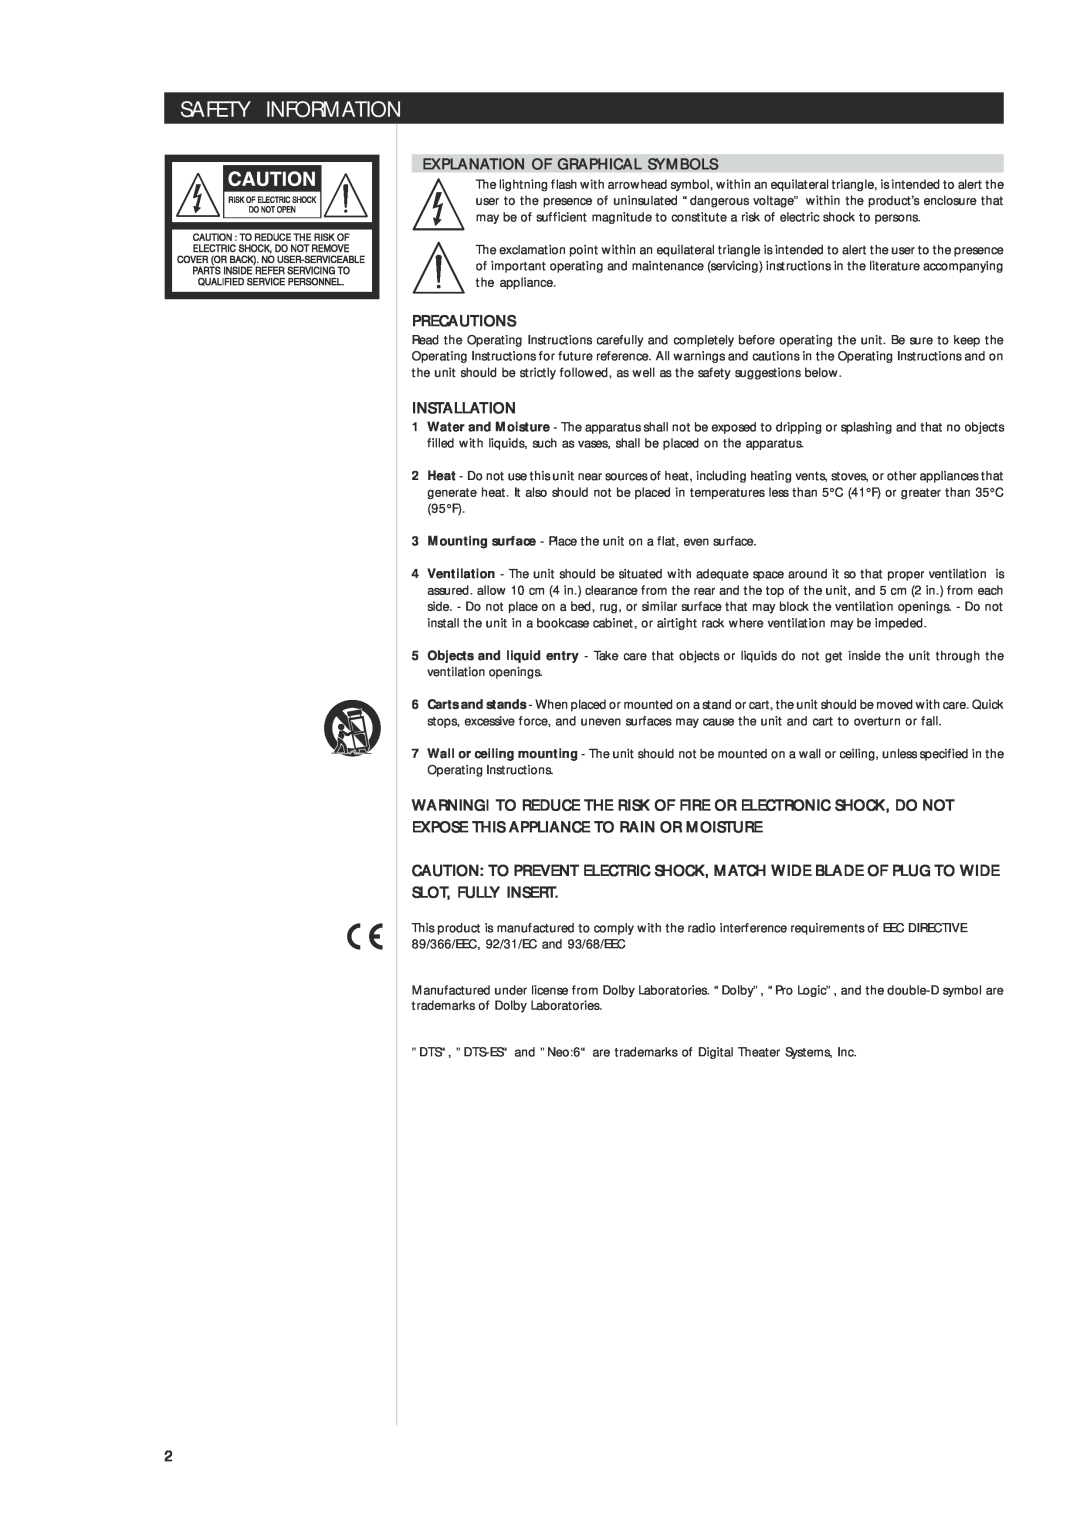 NAD T 753 owner manual Safety Information, Explanation Of Graphical Symbols, Precautions, Installation, Slot, Fully Insert 